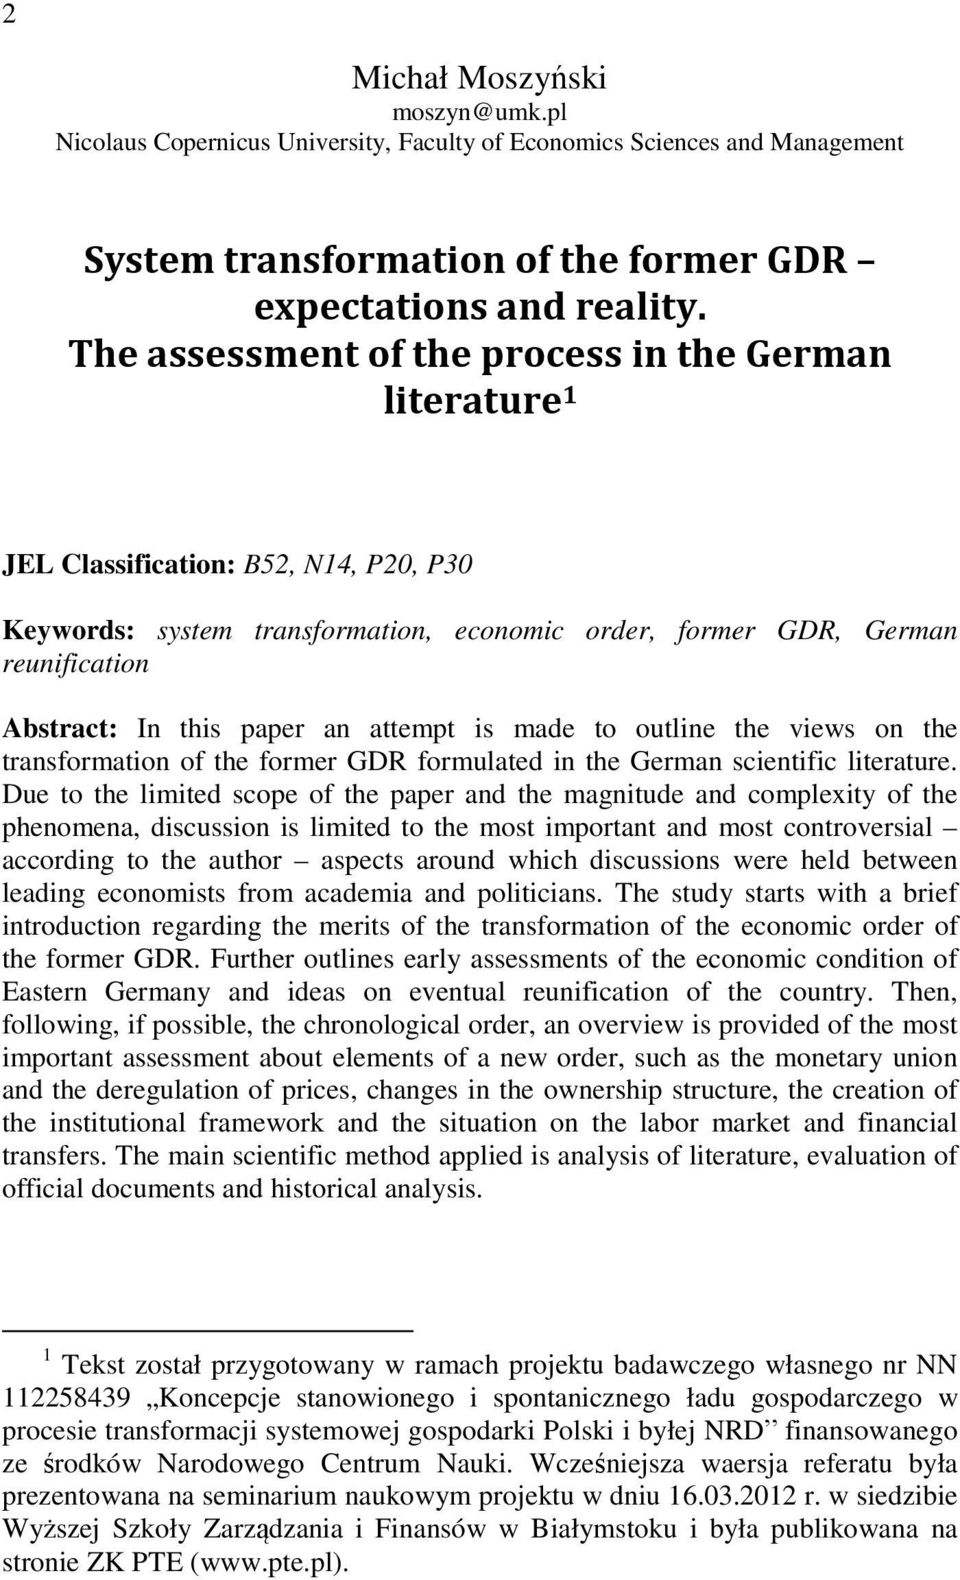 paper an attempt is made to outline the views on the transformation of the former GDR formulated in the German scientific literature.